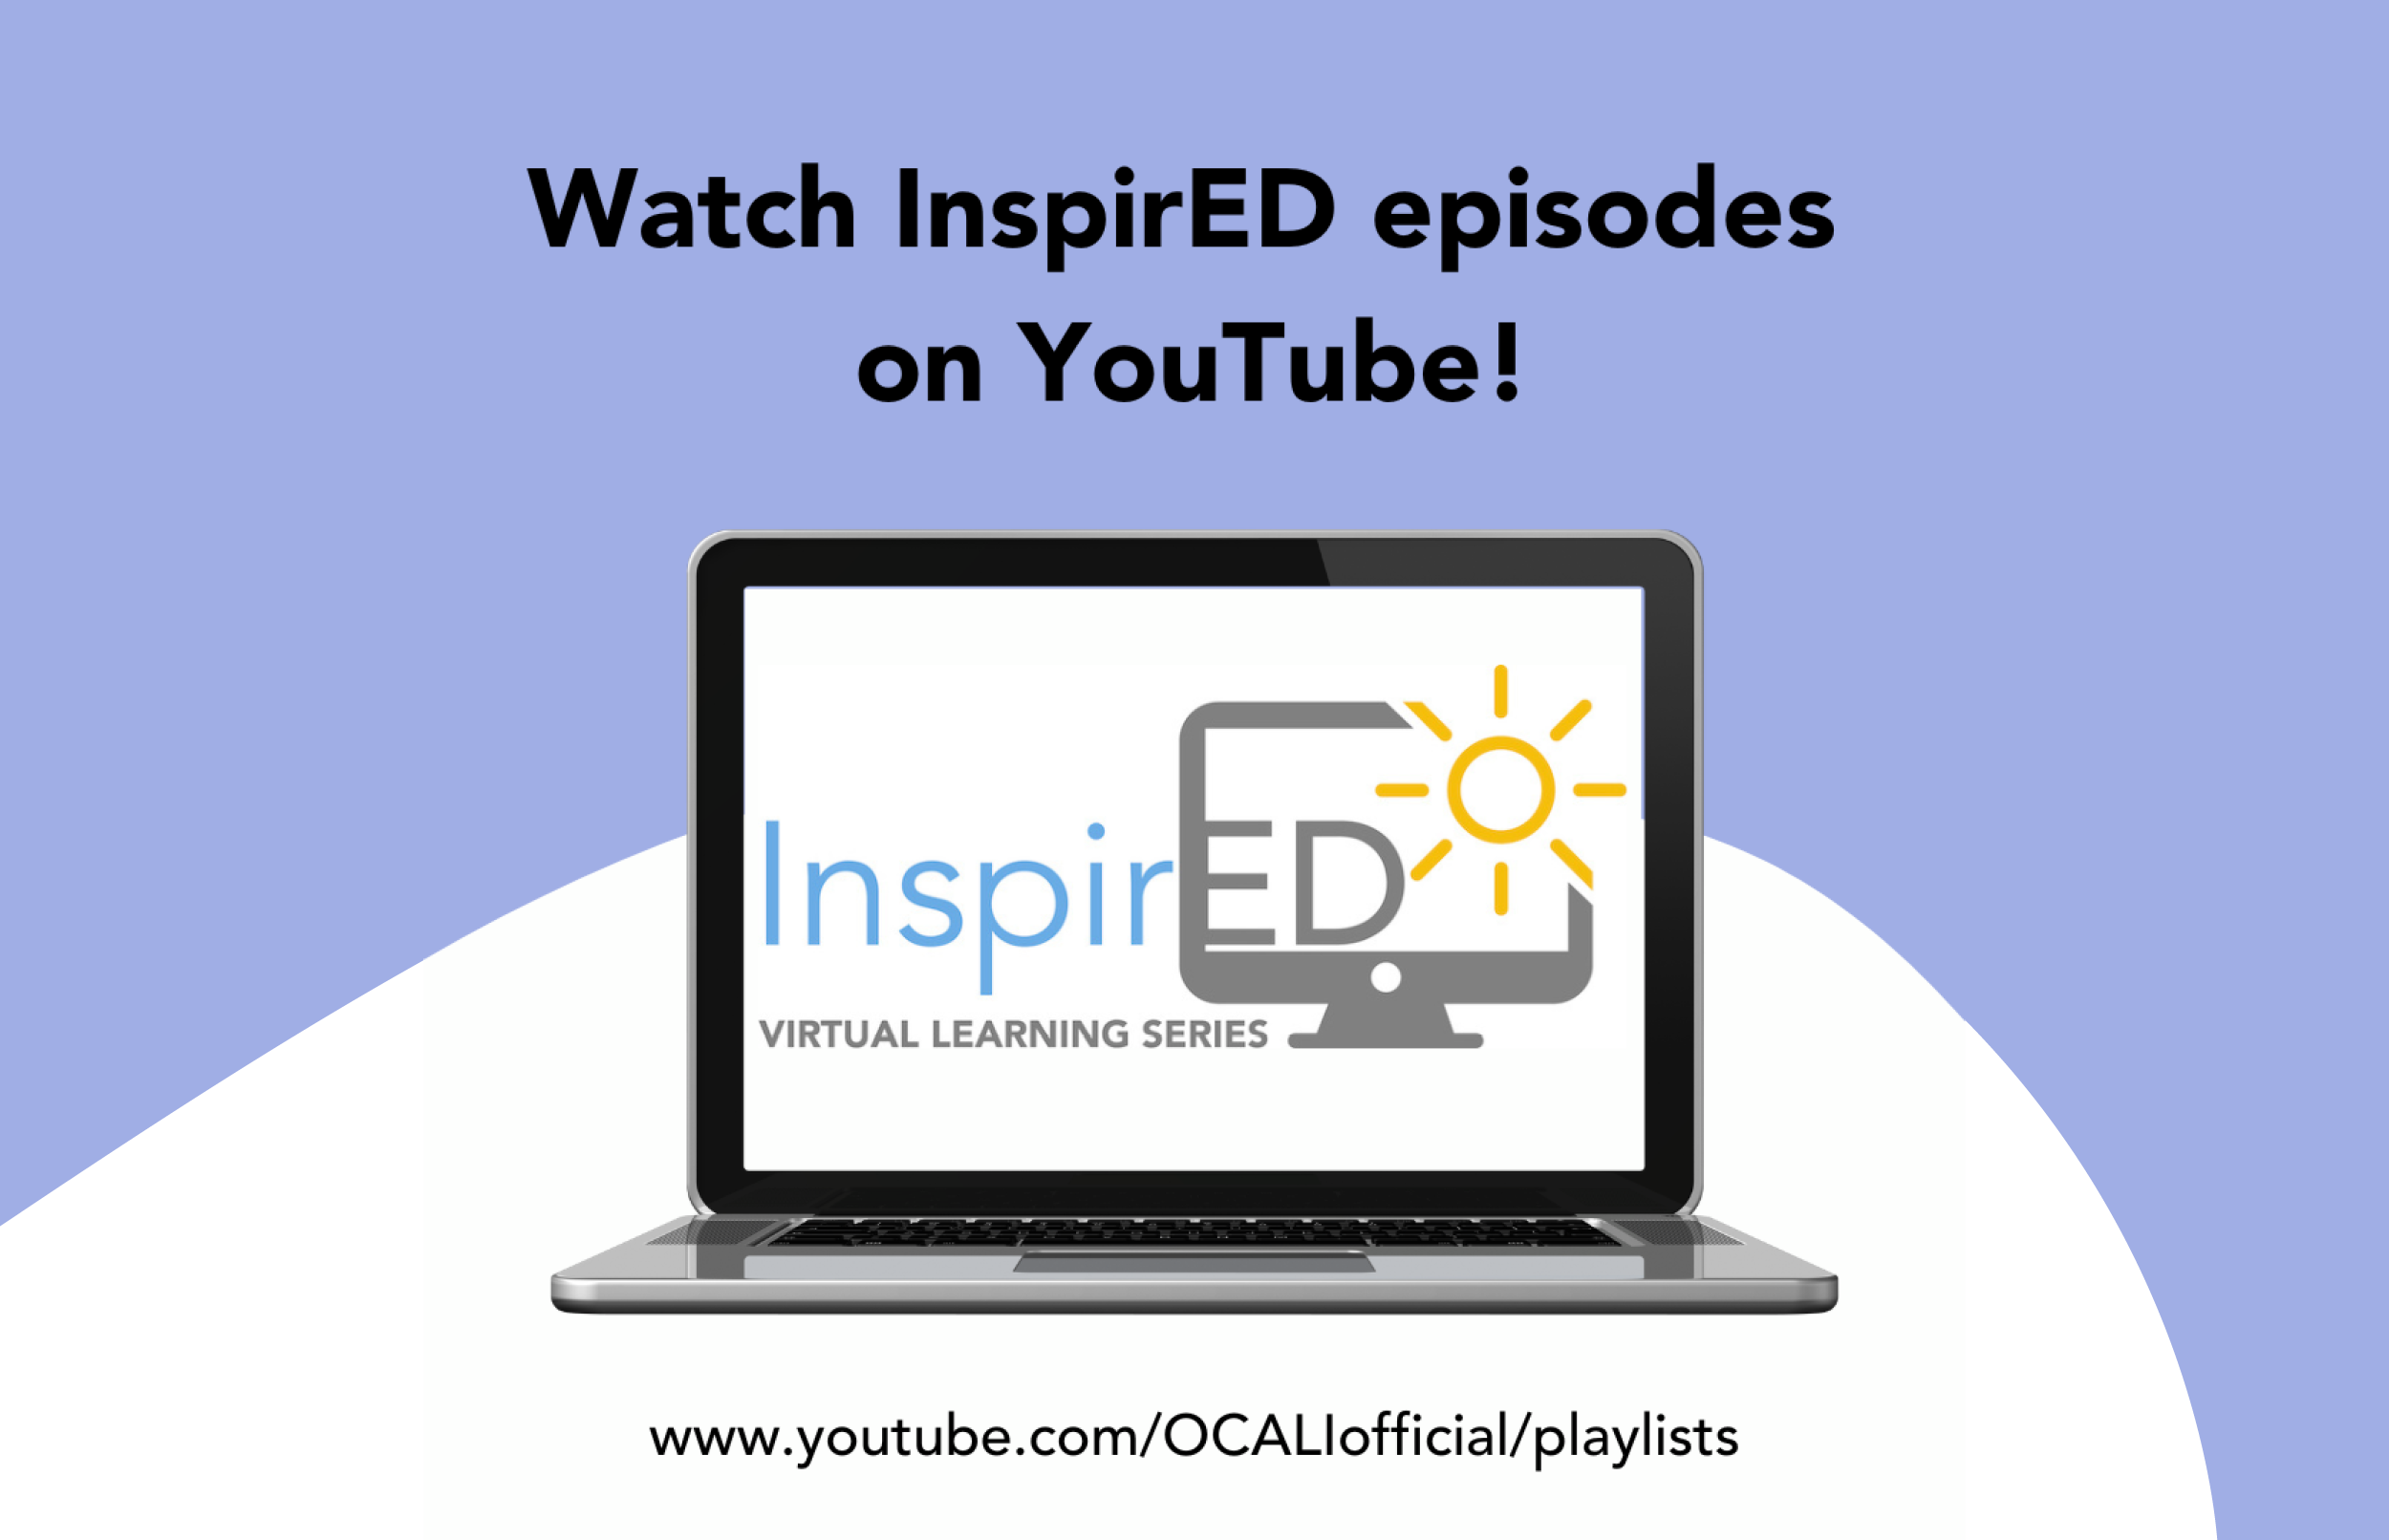 InspirED on YouTube: InspirED Episodes Now on YouTube!